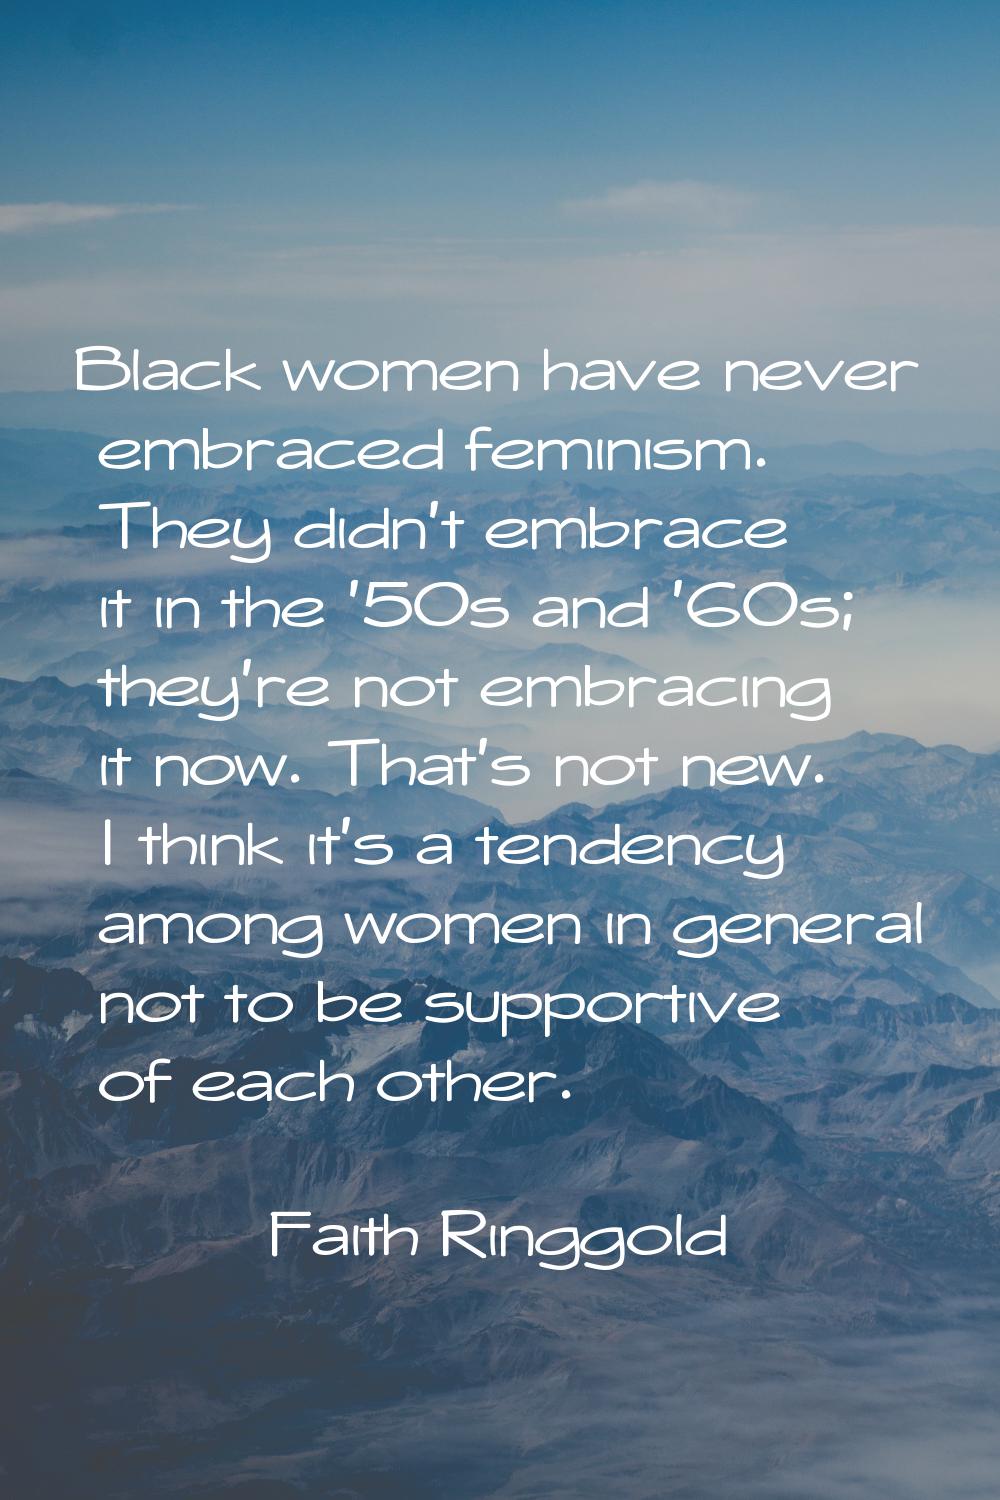 Black women have never embraced feminism. They didn't embrace it in the '50s and '60s; they're not 